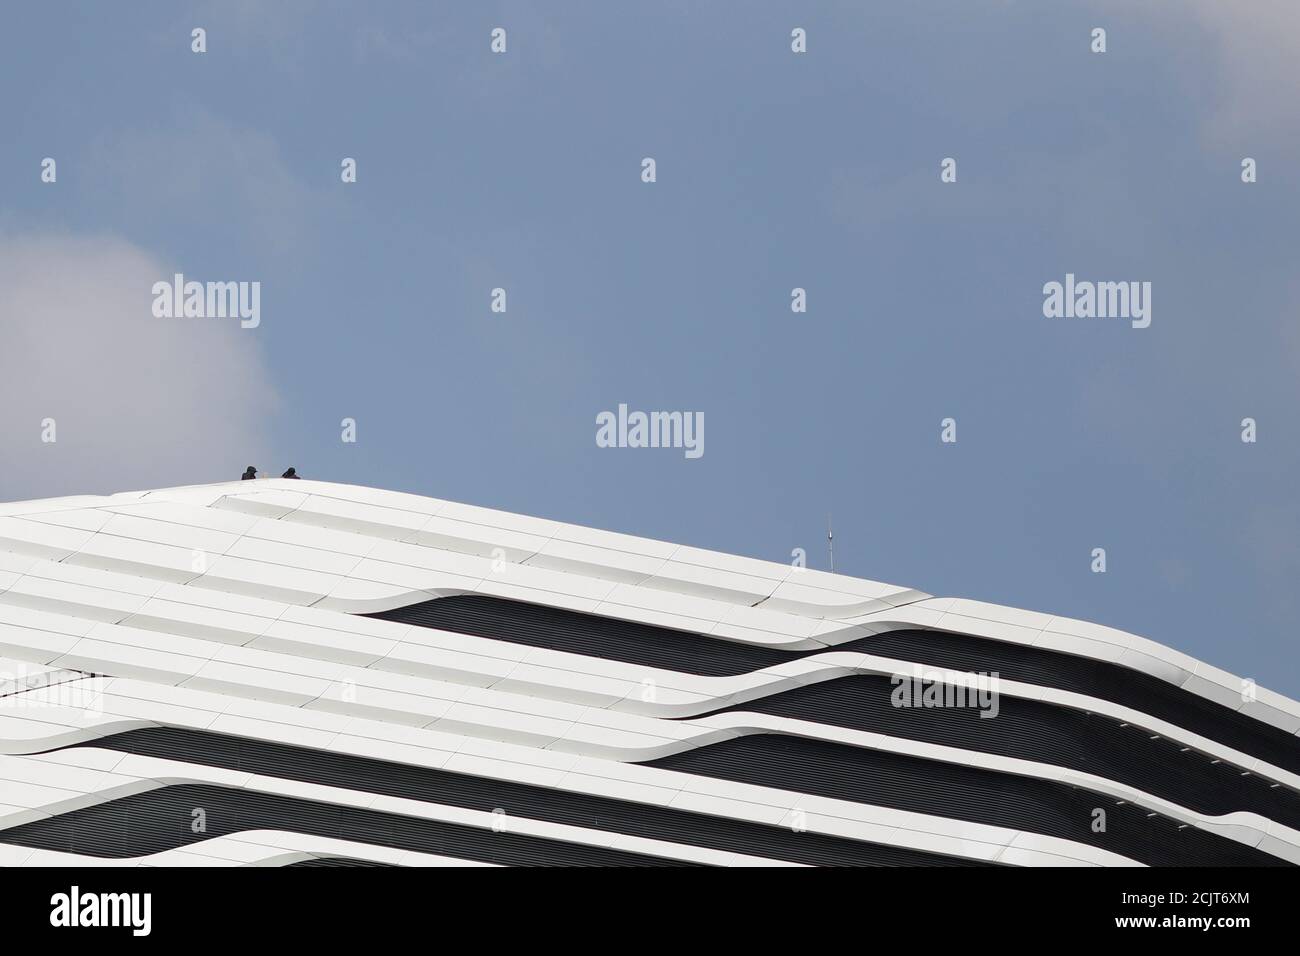 Anti-government demonstrators are seen on the roof of the Jockey Club Innovation Tower at the Polytechnic University in Hong Kong, China, November 16, 2019. REUTERS/Adnan Abidi Stock Photo